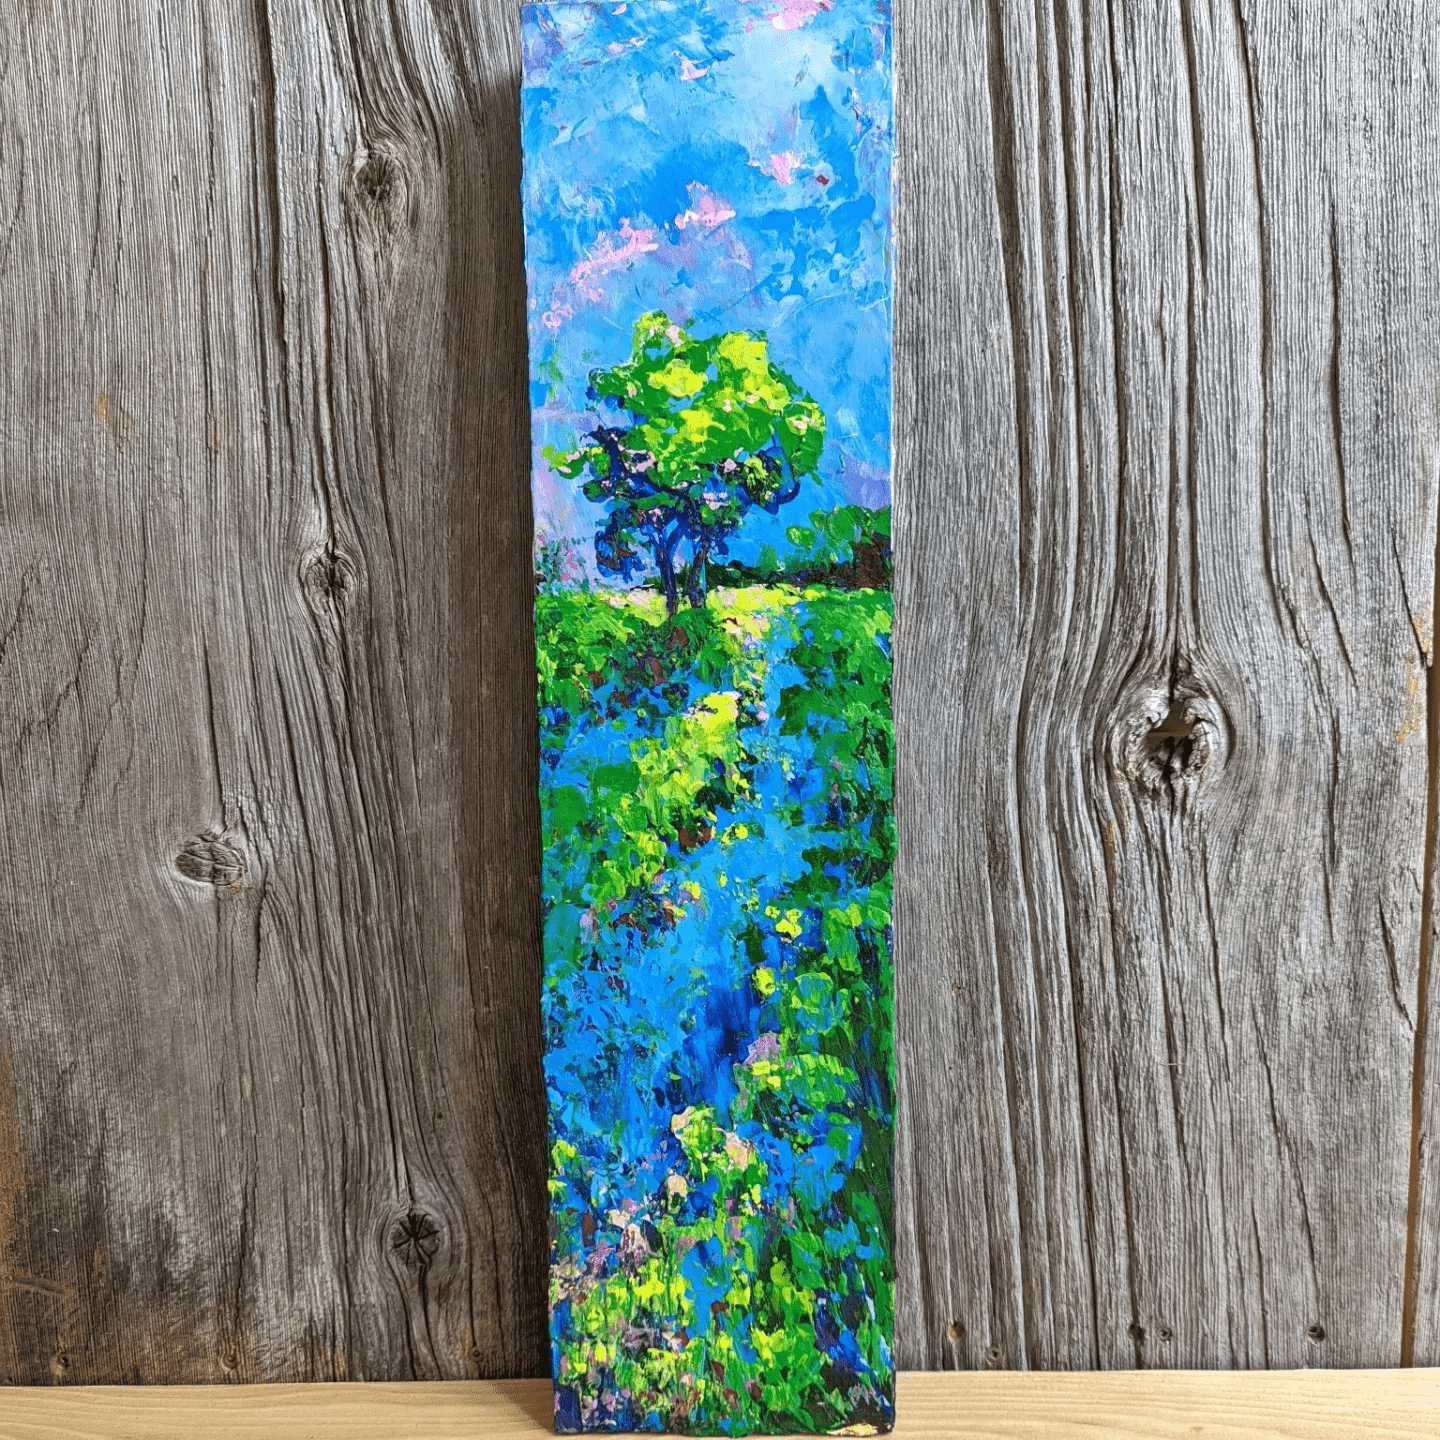 Love Local Products "Tall Blue Tree" Painting, made in Quebec by Nancy Overbury